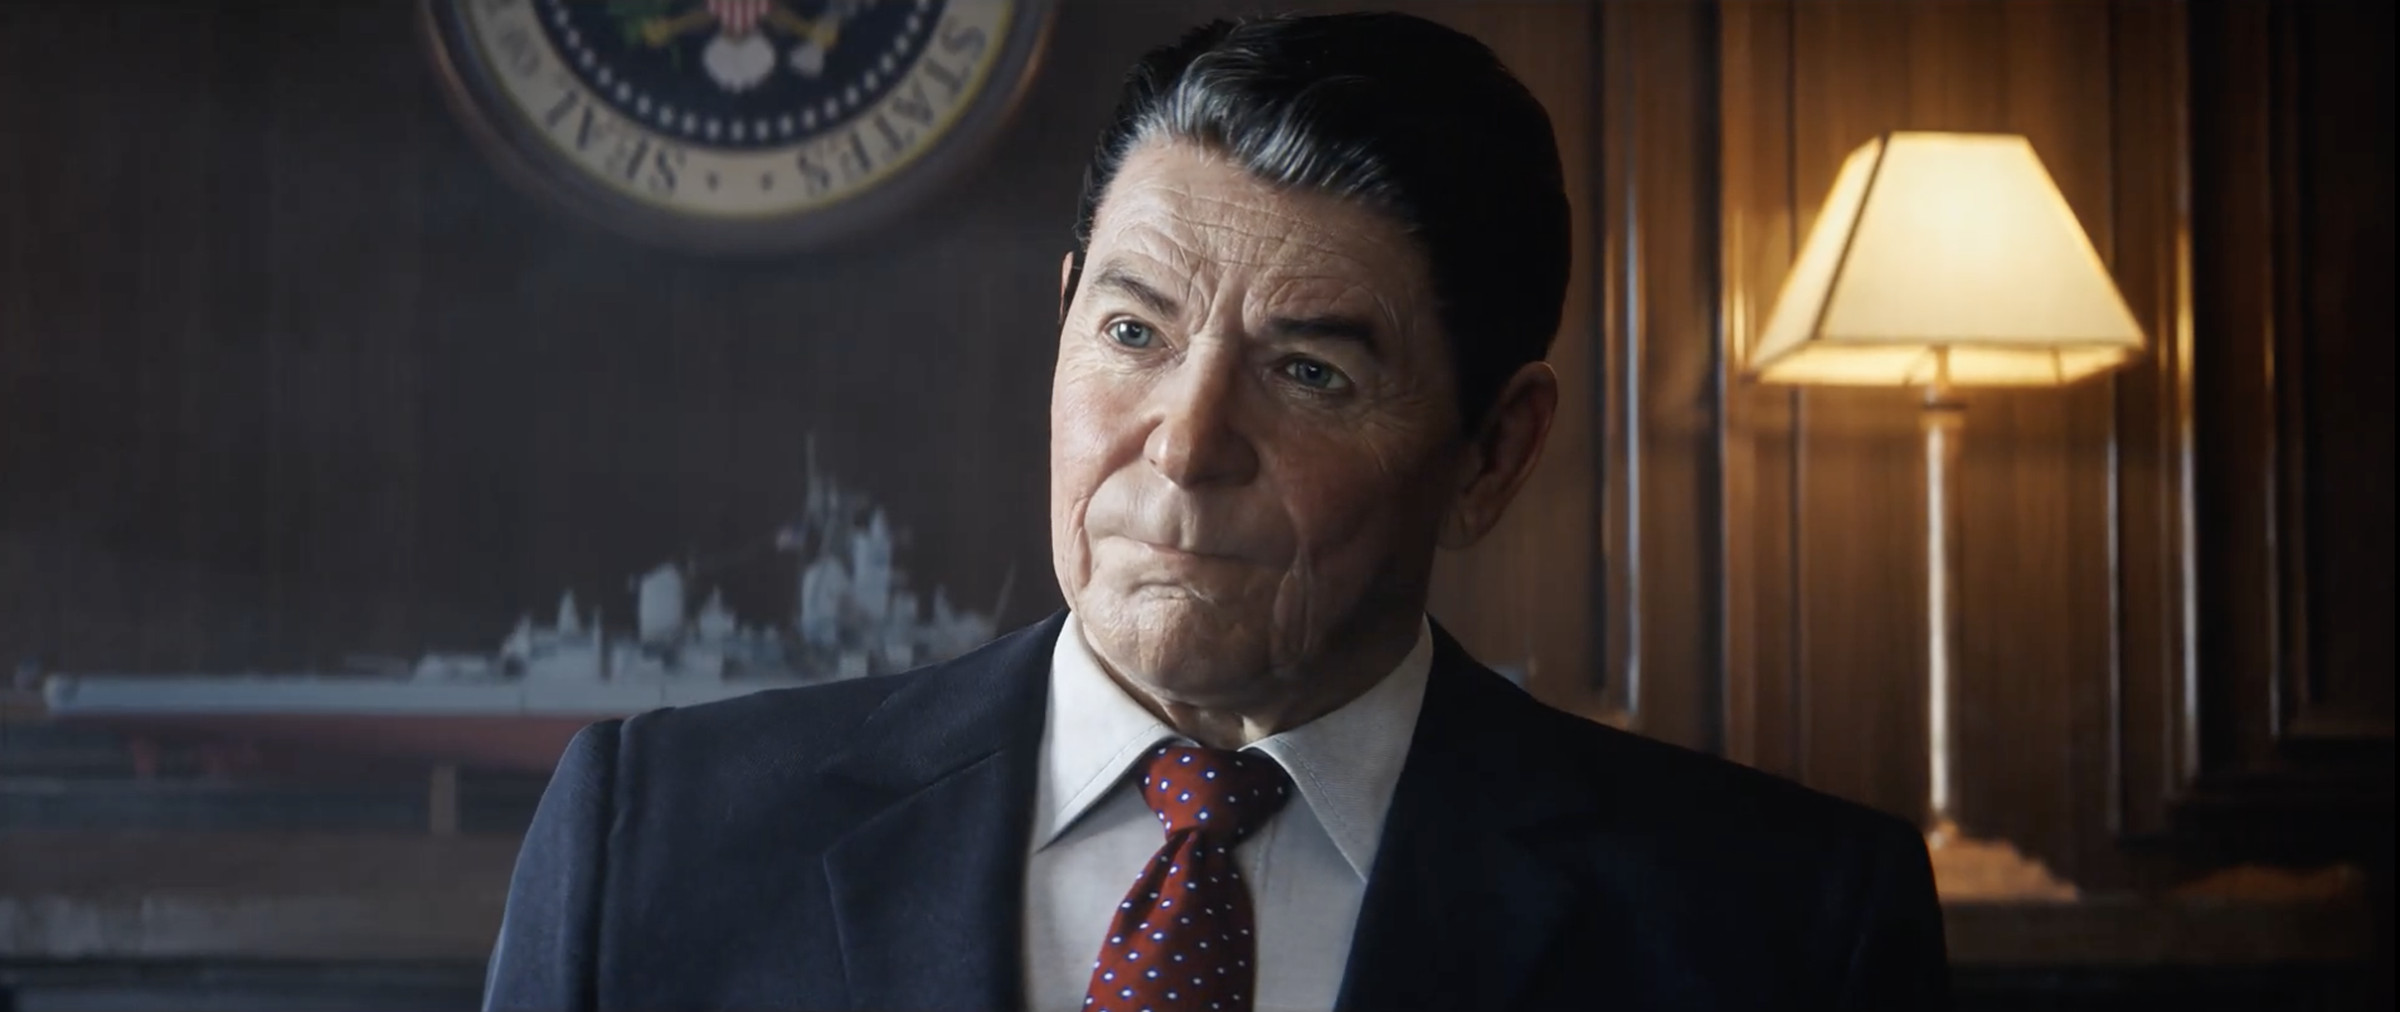 Here is real-life President Ronald Reagan, now a Call of Duty character who absolves the player of potential war crimes by telling them they’re going to save the world. 